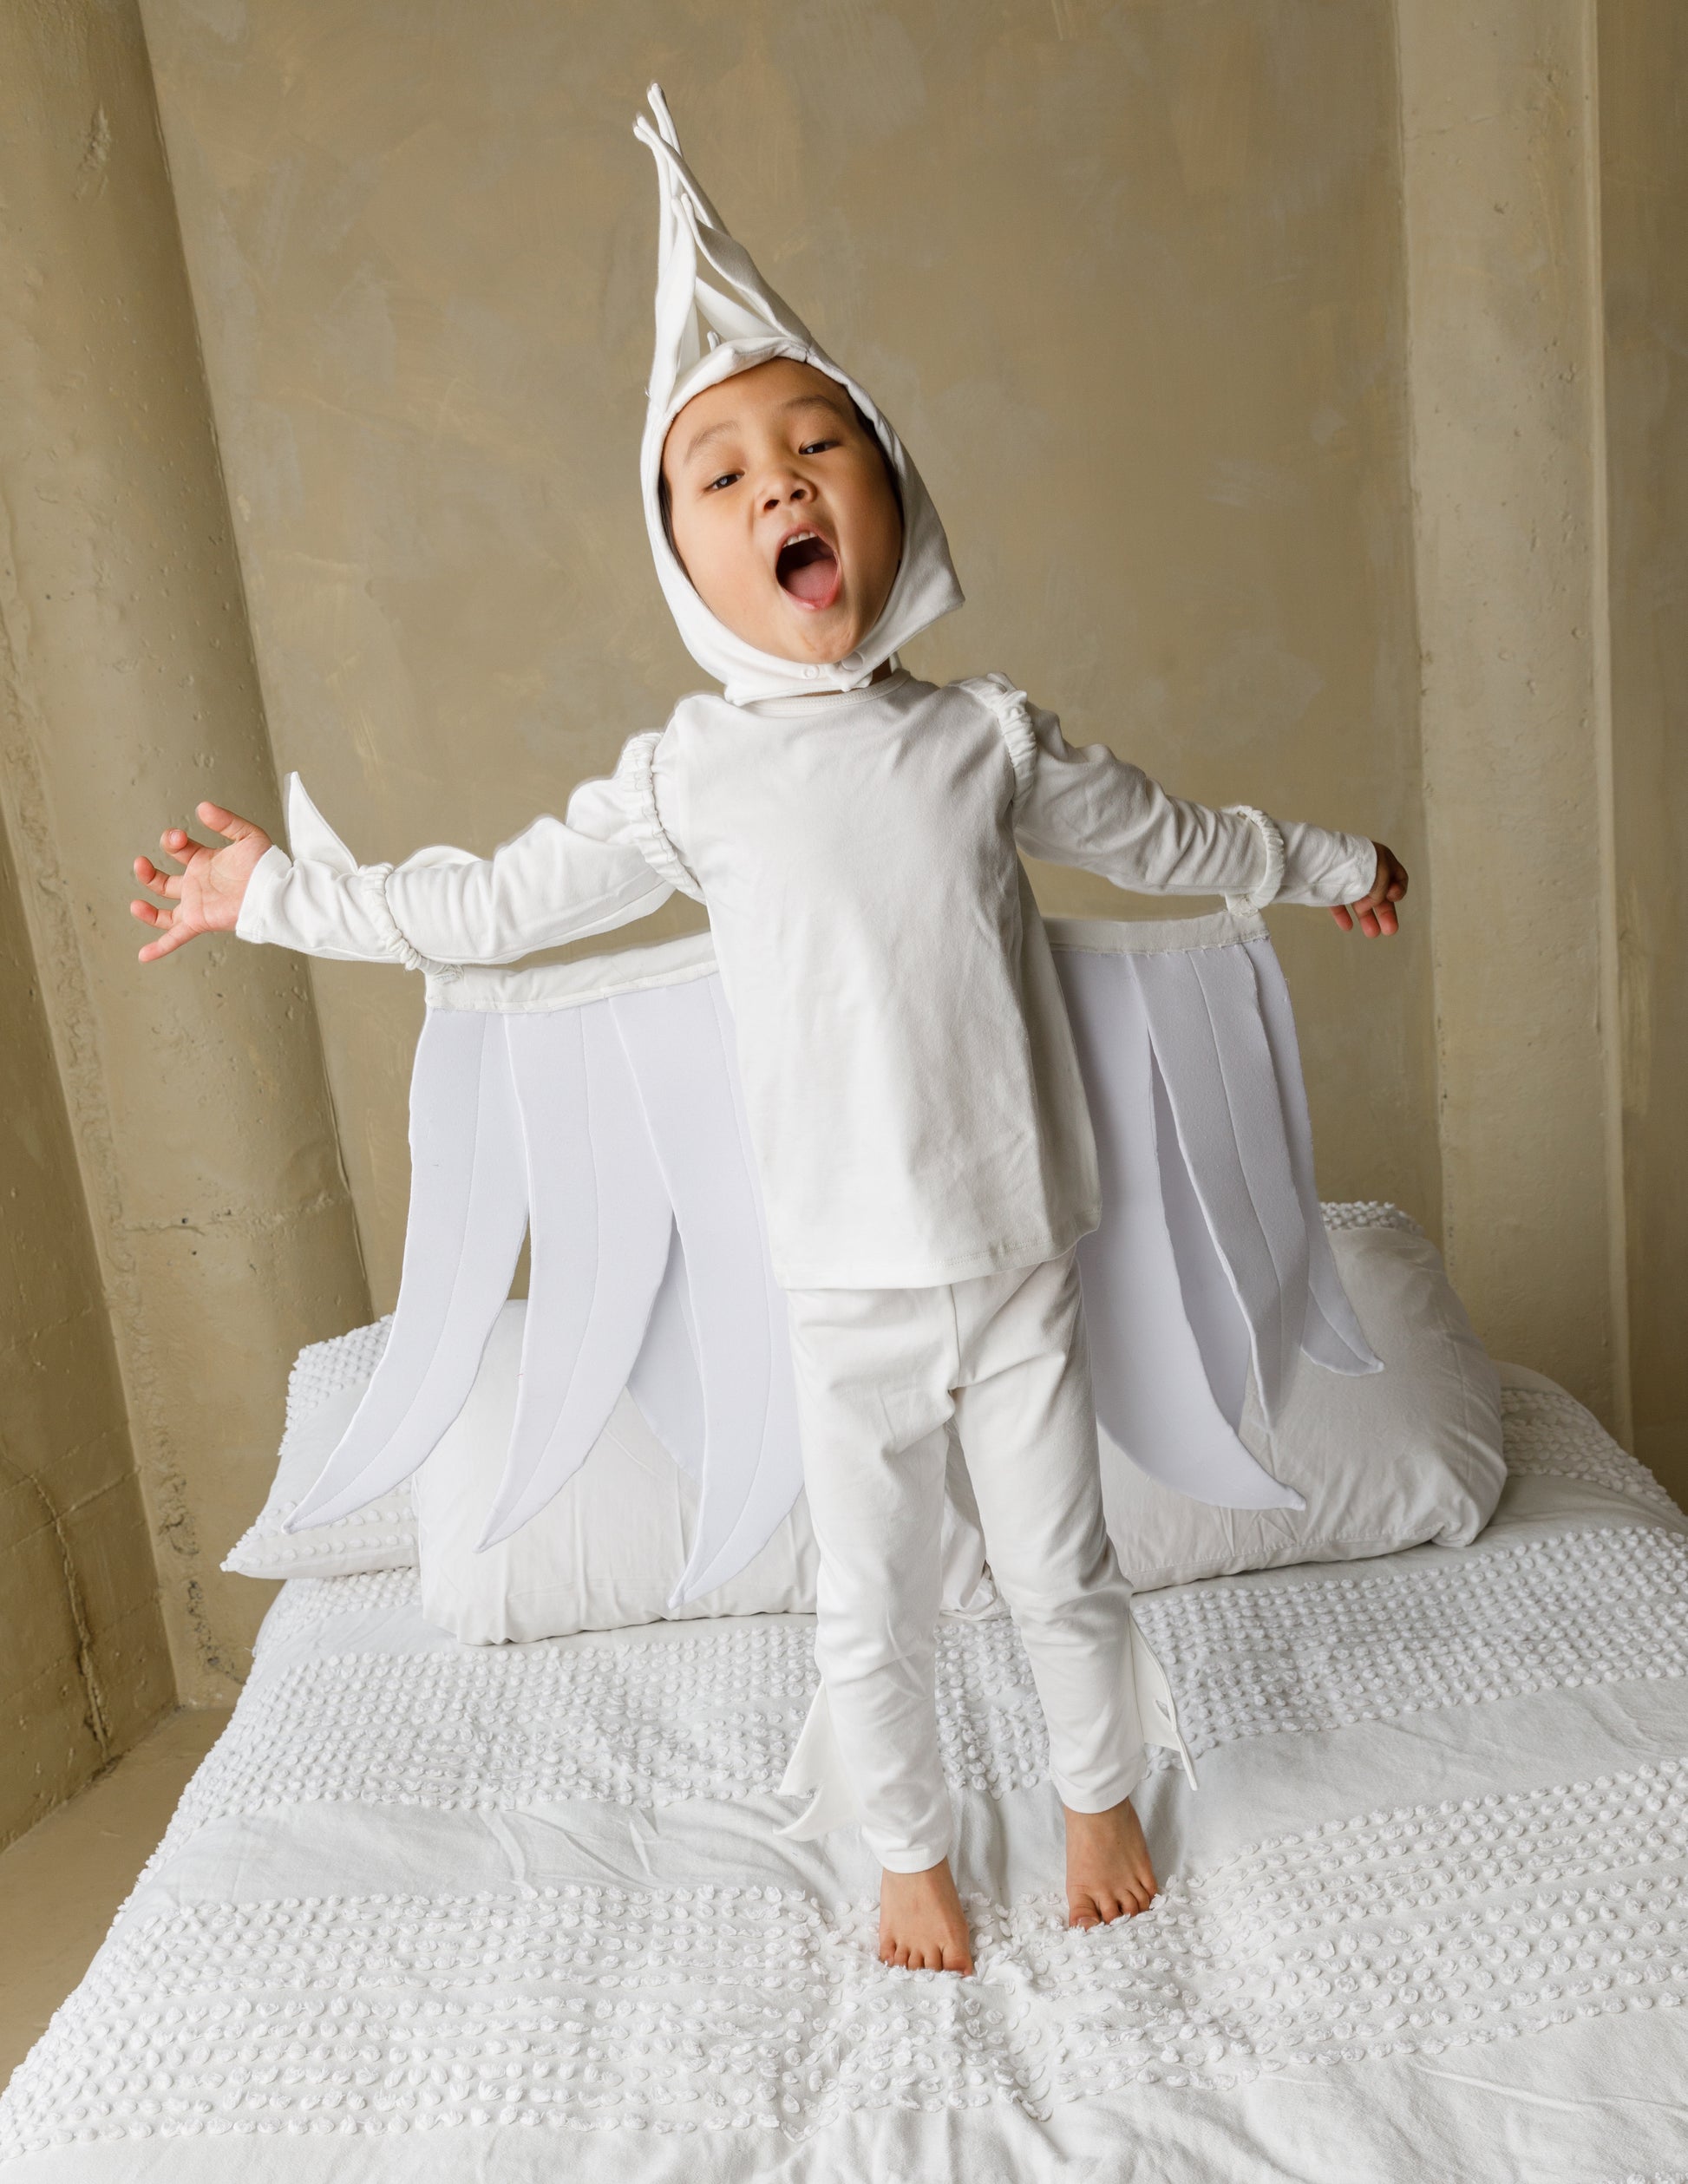 White bird costume, pajama costume for kids, eco-friendly, environmentally friendly costumes, halloween costumes for kids.